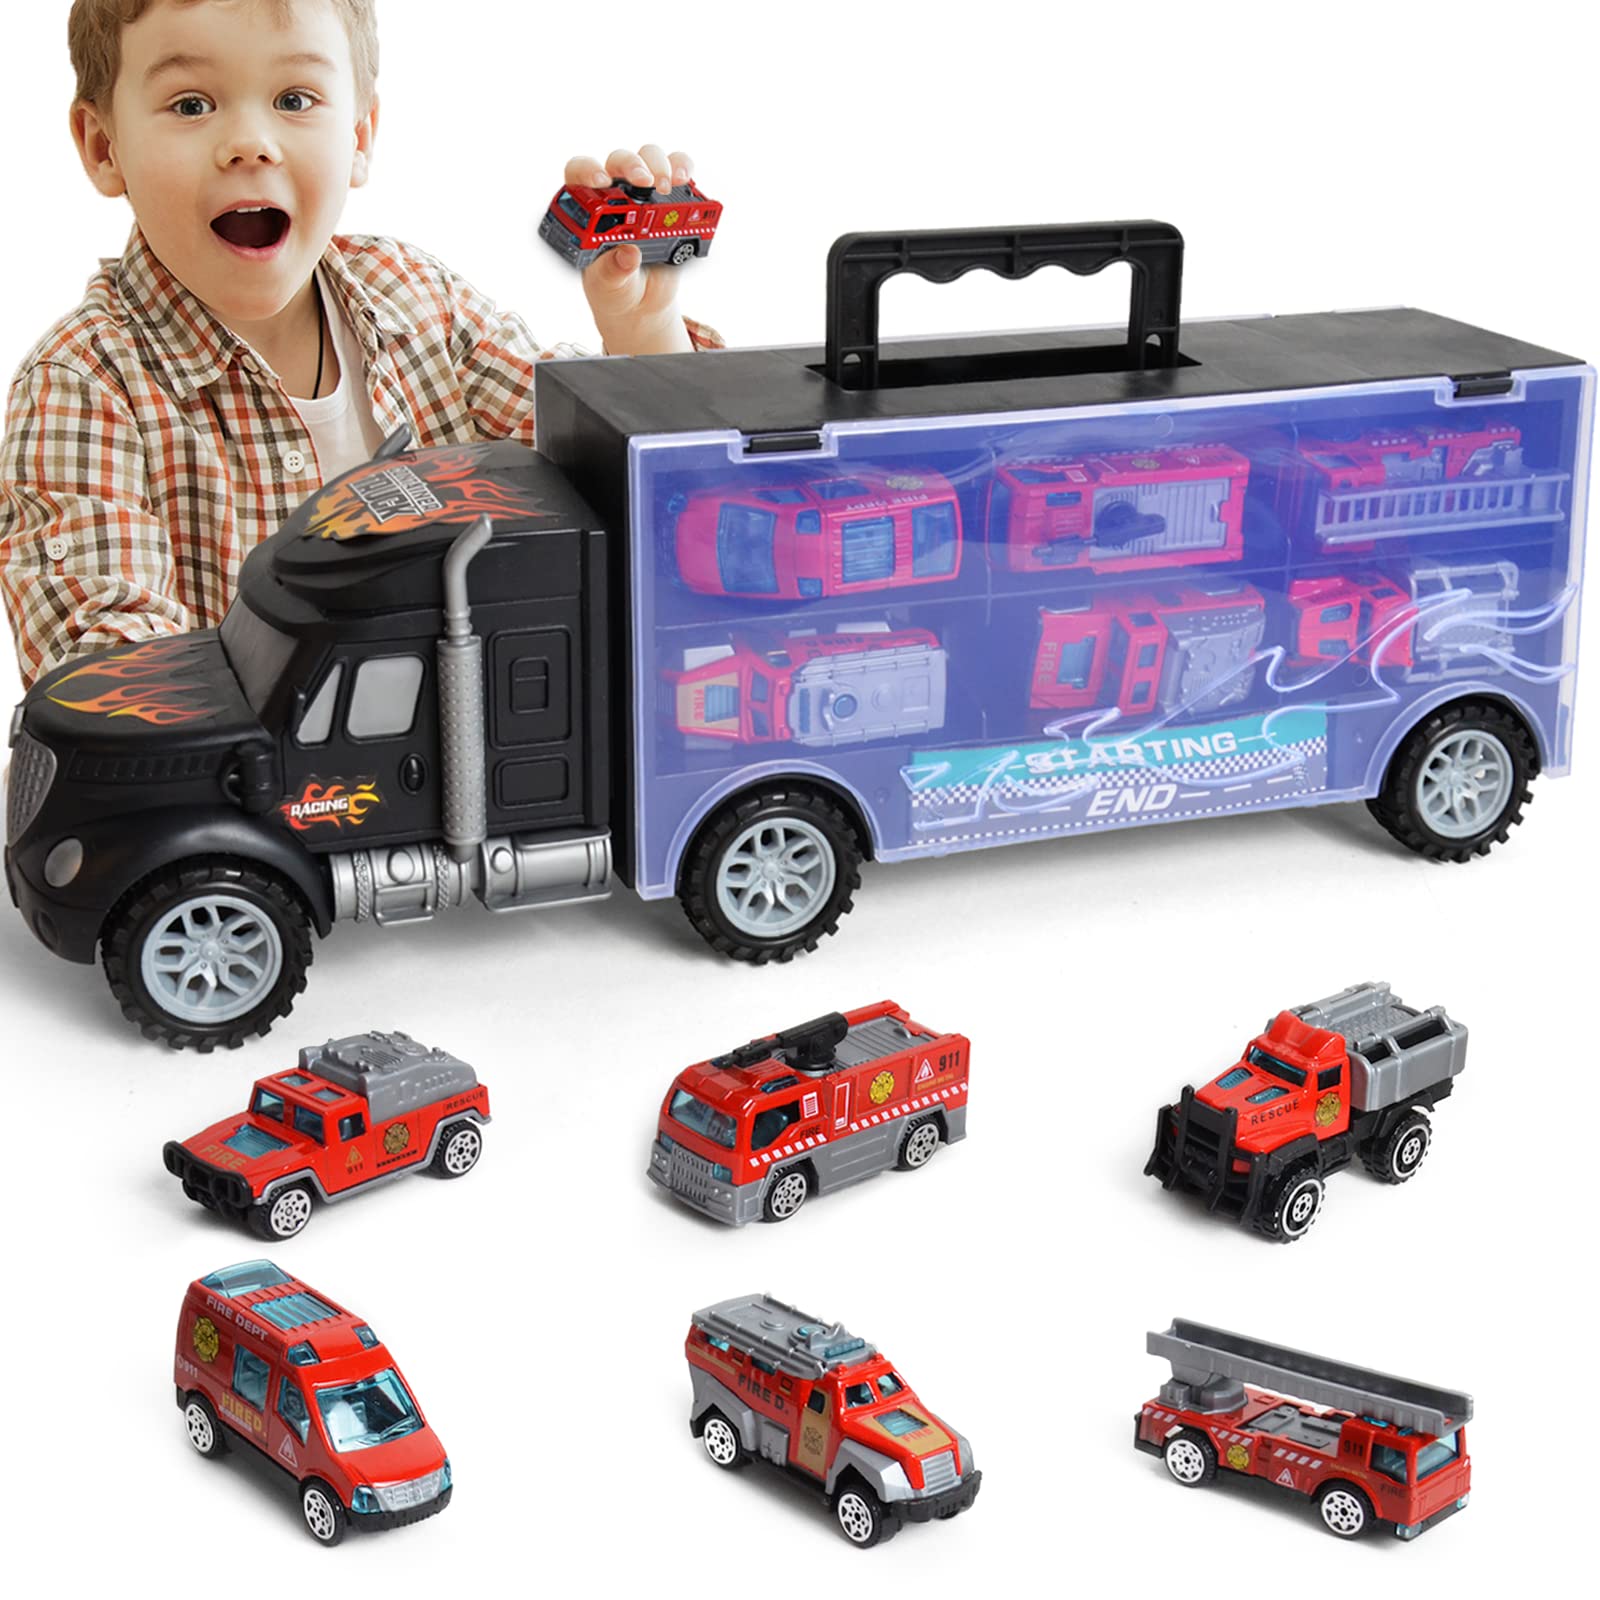 Sethland Trucks Toys for Boys, carrier Truck cars with 6 Small Fire Trucks, Trucks Transport Vehicles cars Toys Set for 3-8 Year